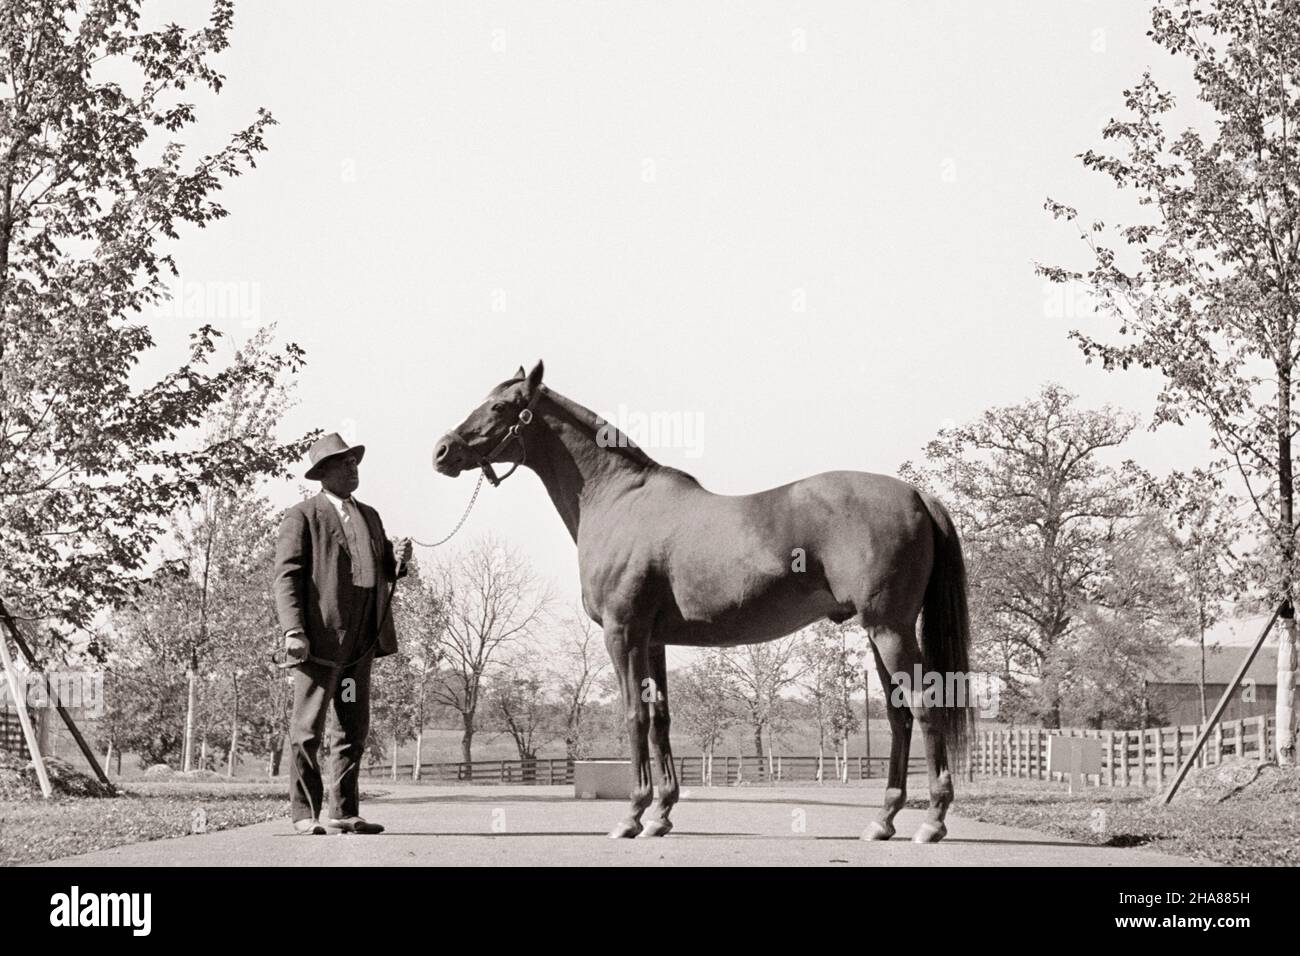 1920s MAN ‘O WAR CHAMPION THOROUGHBRED HORSE WITH GROOM - h1911 LAN001 HARS HANDLER MAMMAL RACE HORSE STALLION BLACK AND WHITE GRACEFUL OLD FASHIONED Stock Photo